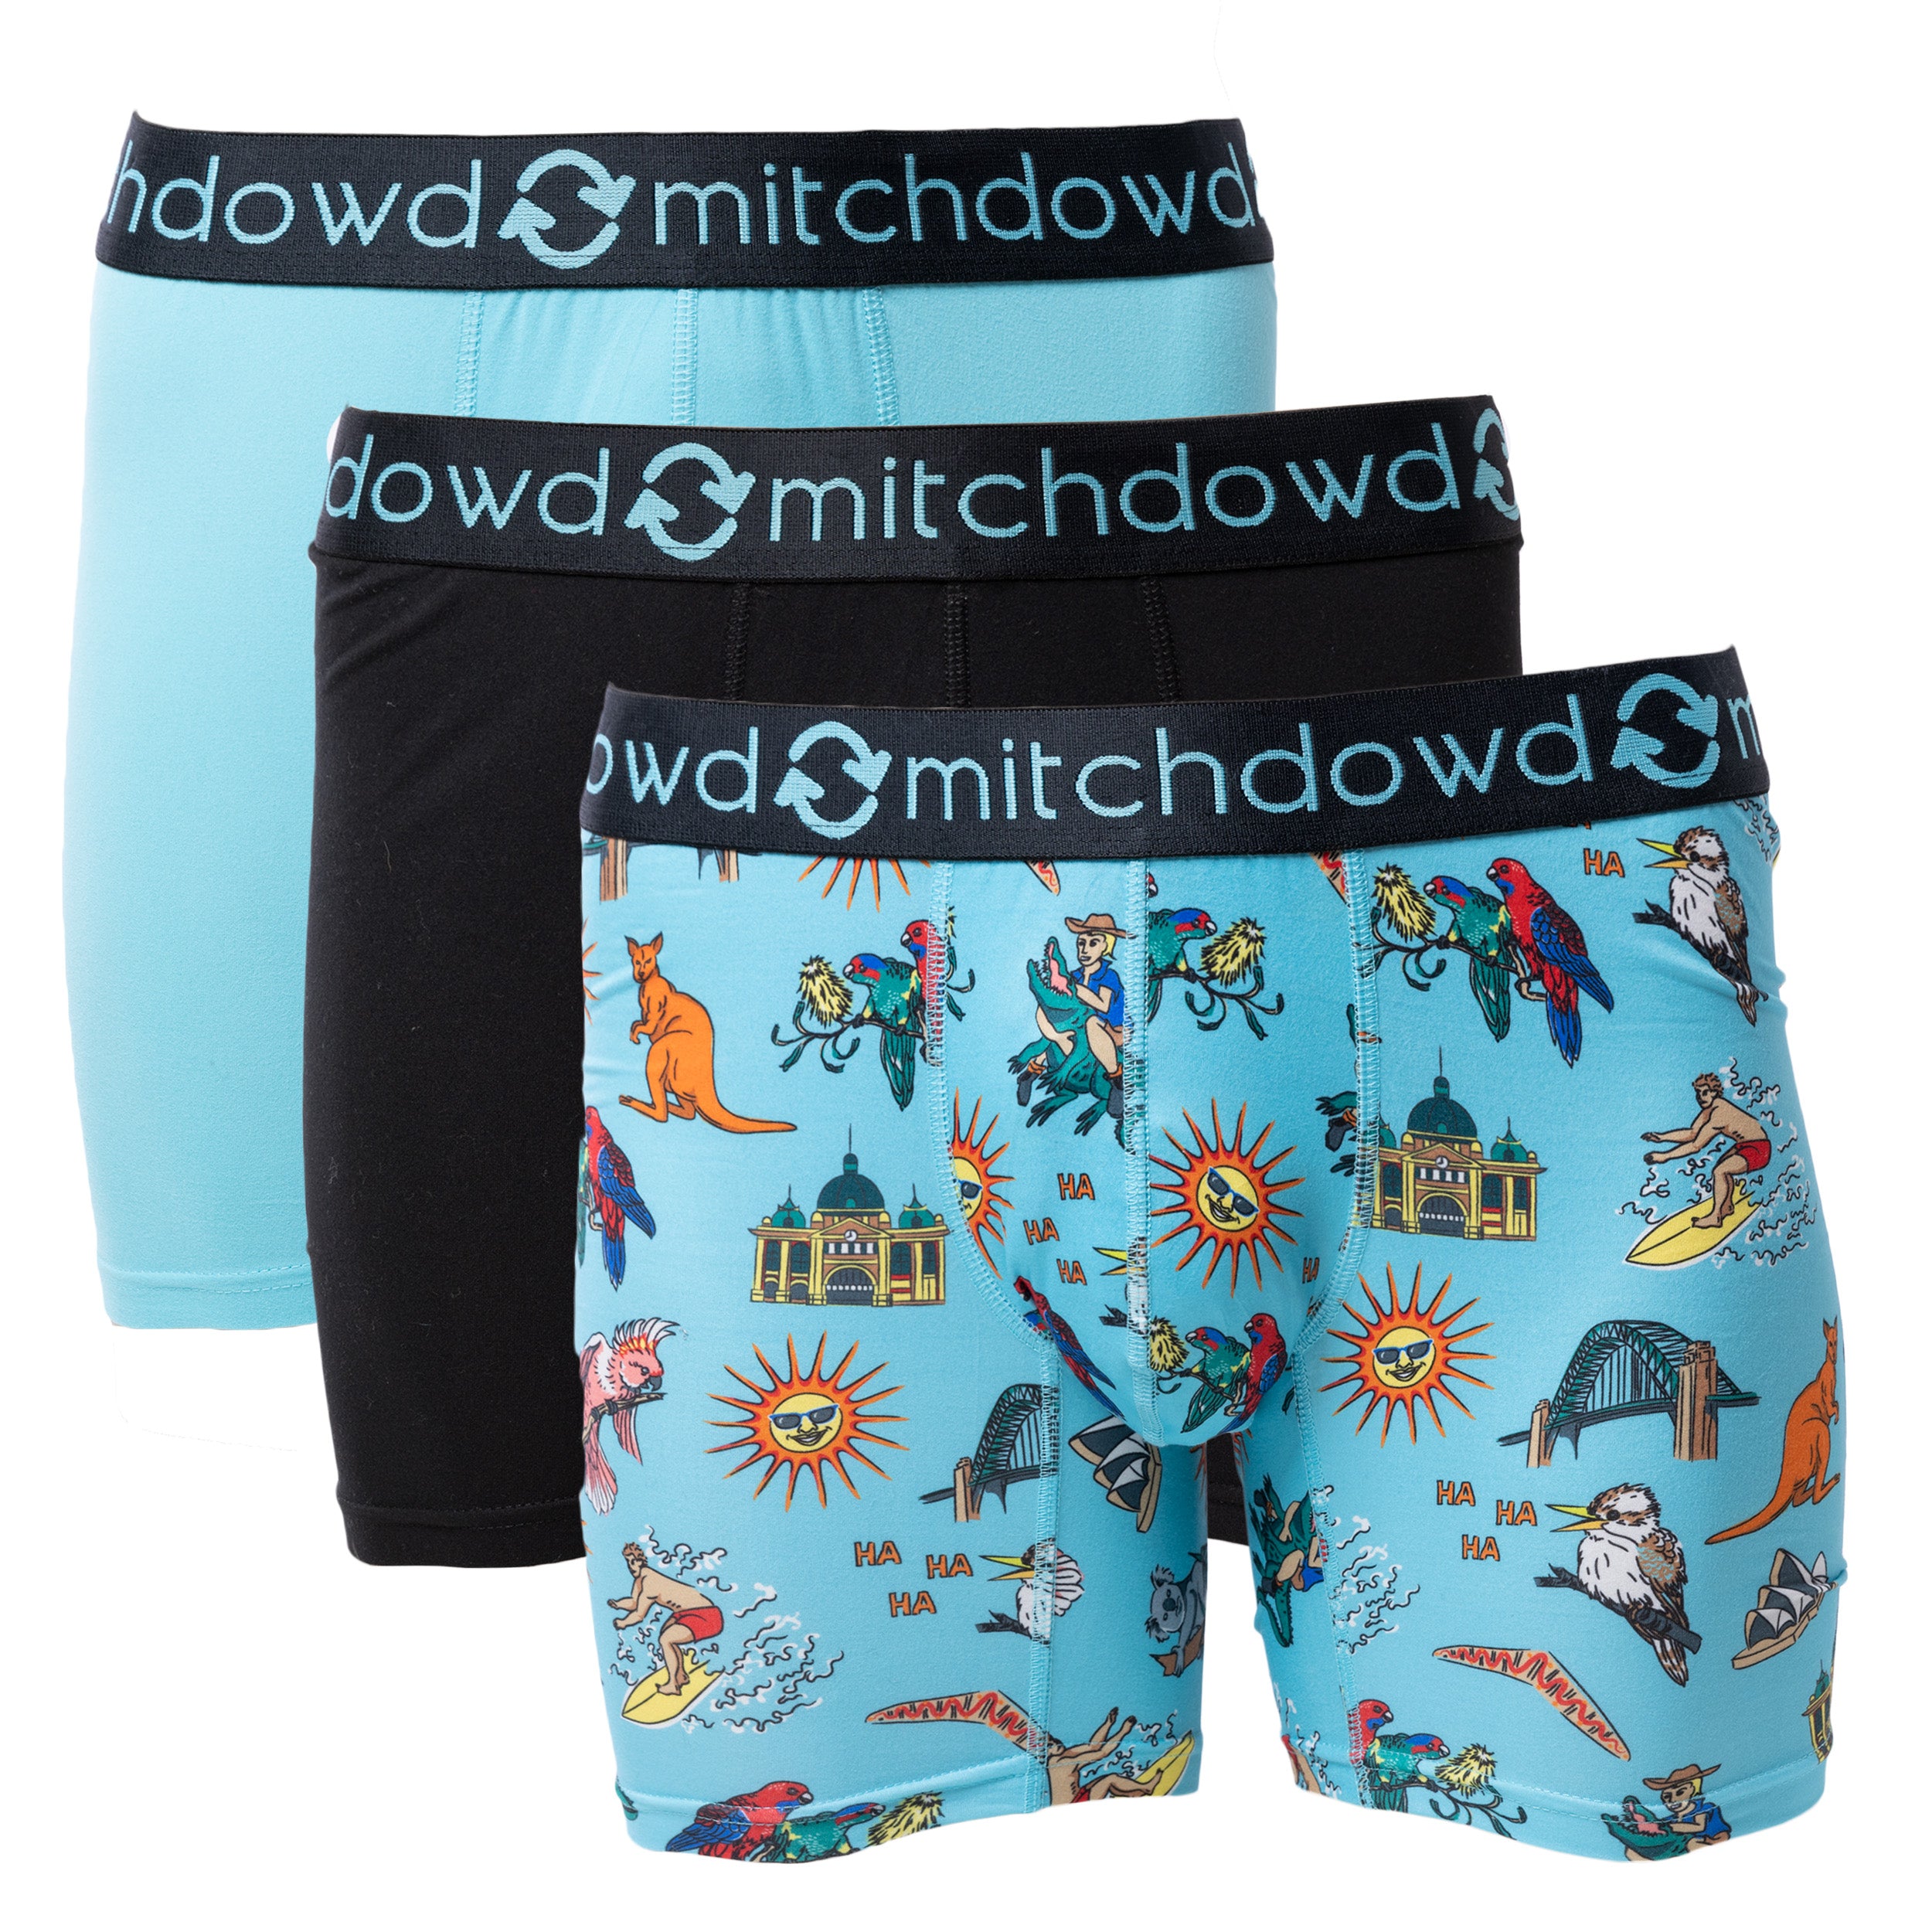 Men's Eco Comfort Vintage Oz Recycled Repreve® Trunk <br>3 Pack lowd mitchdowa 